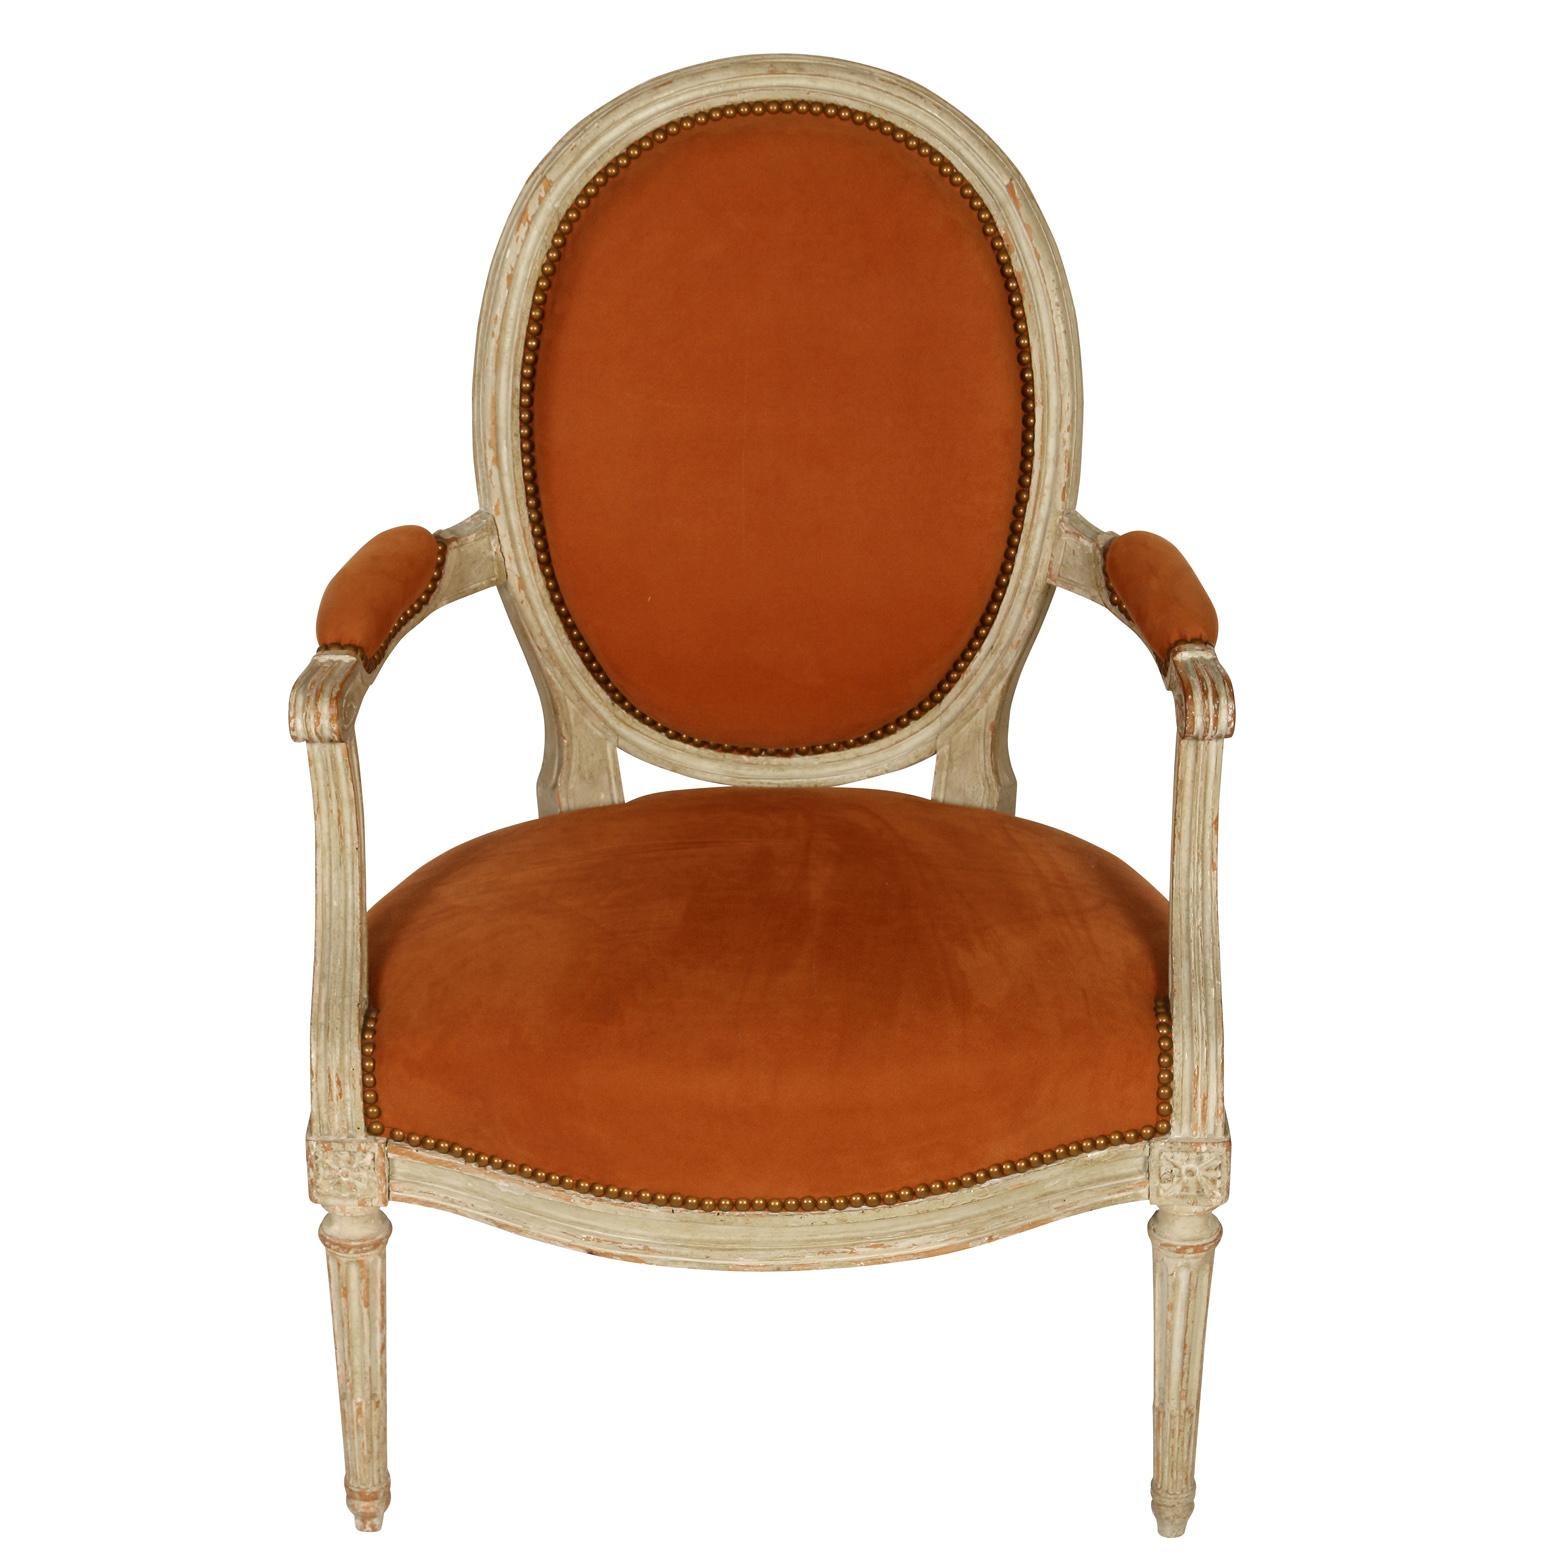 A pair of Louis XV painted fauteuils in cabriolet with straight reeded legs and oval backs, upholstered in orange suede with padded orange suede armrests.